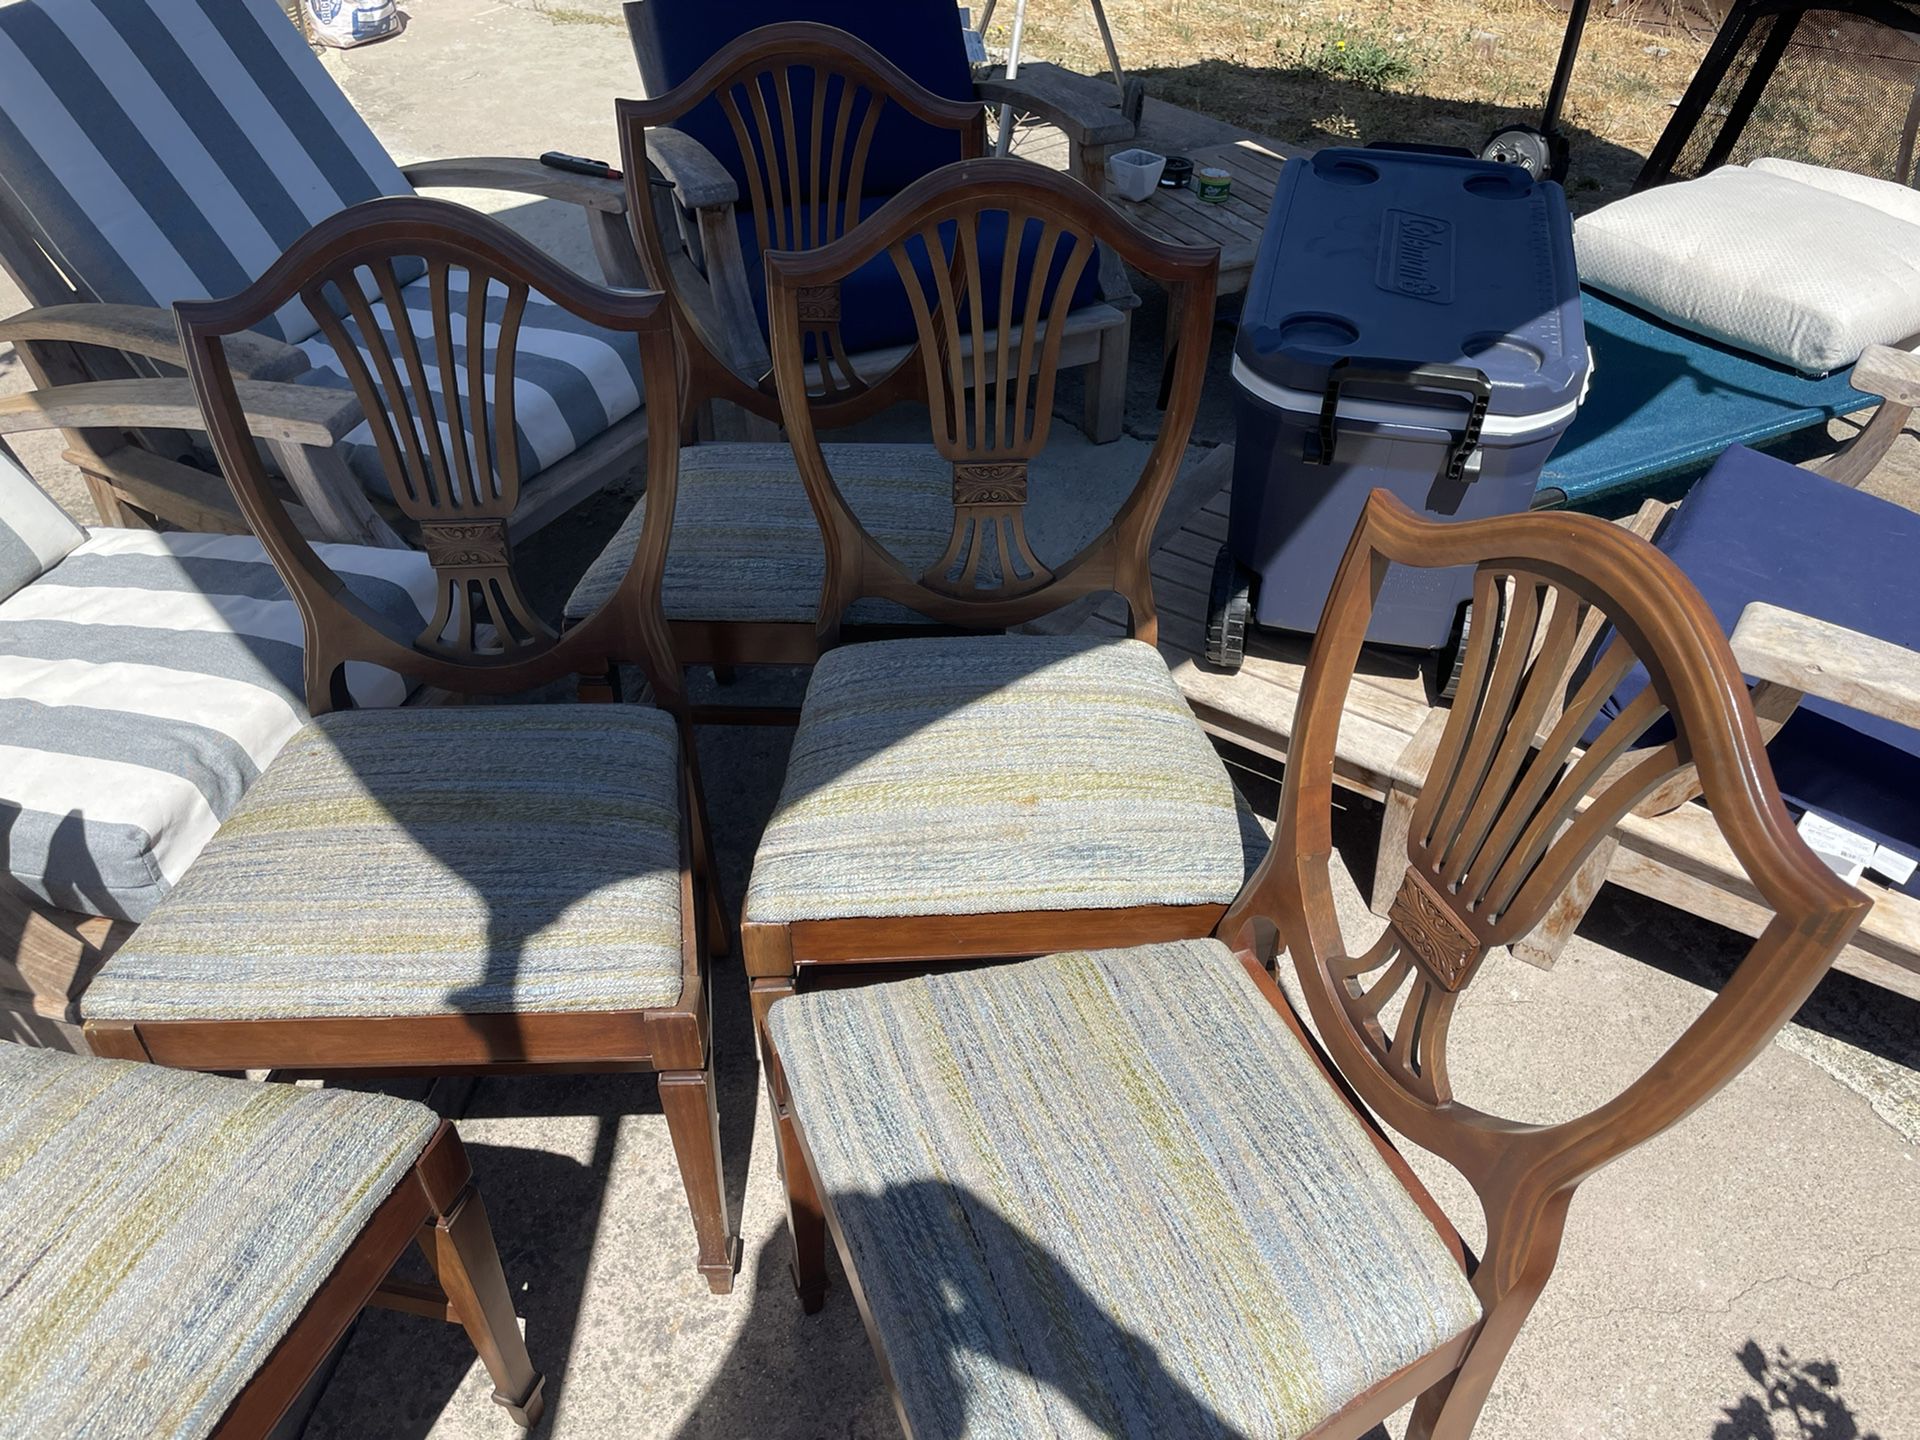 5 Antique Dining Chairs